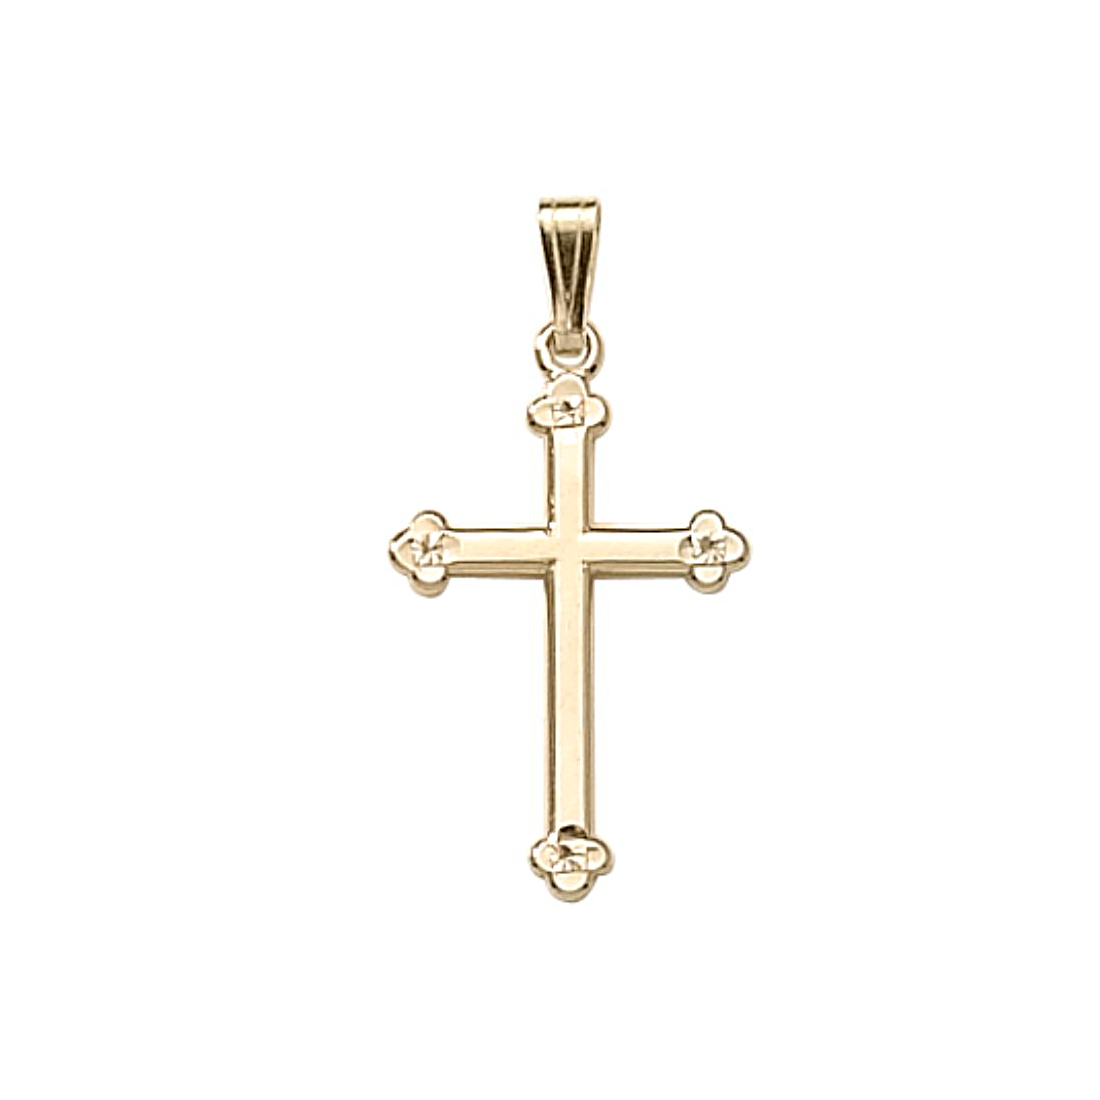 14 Karat Yellow Gold Adult Cross Pendant Having An Engraved Design And Tri-Curved Ends